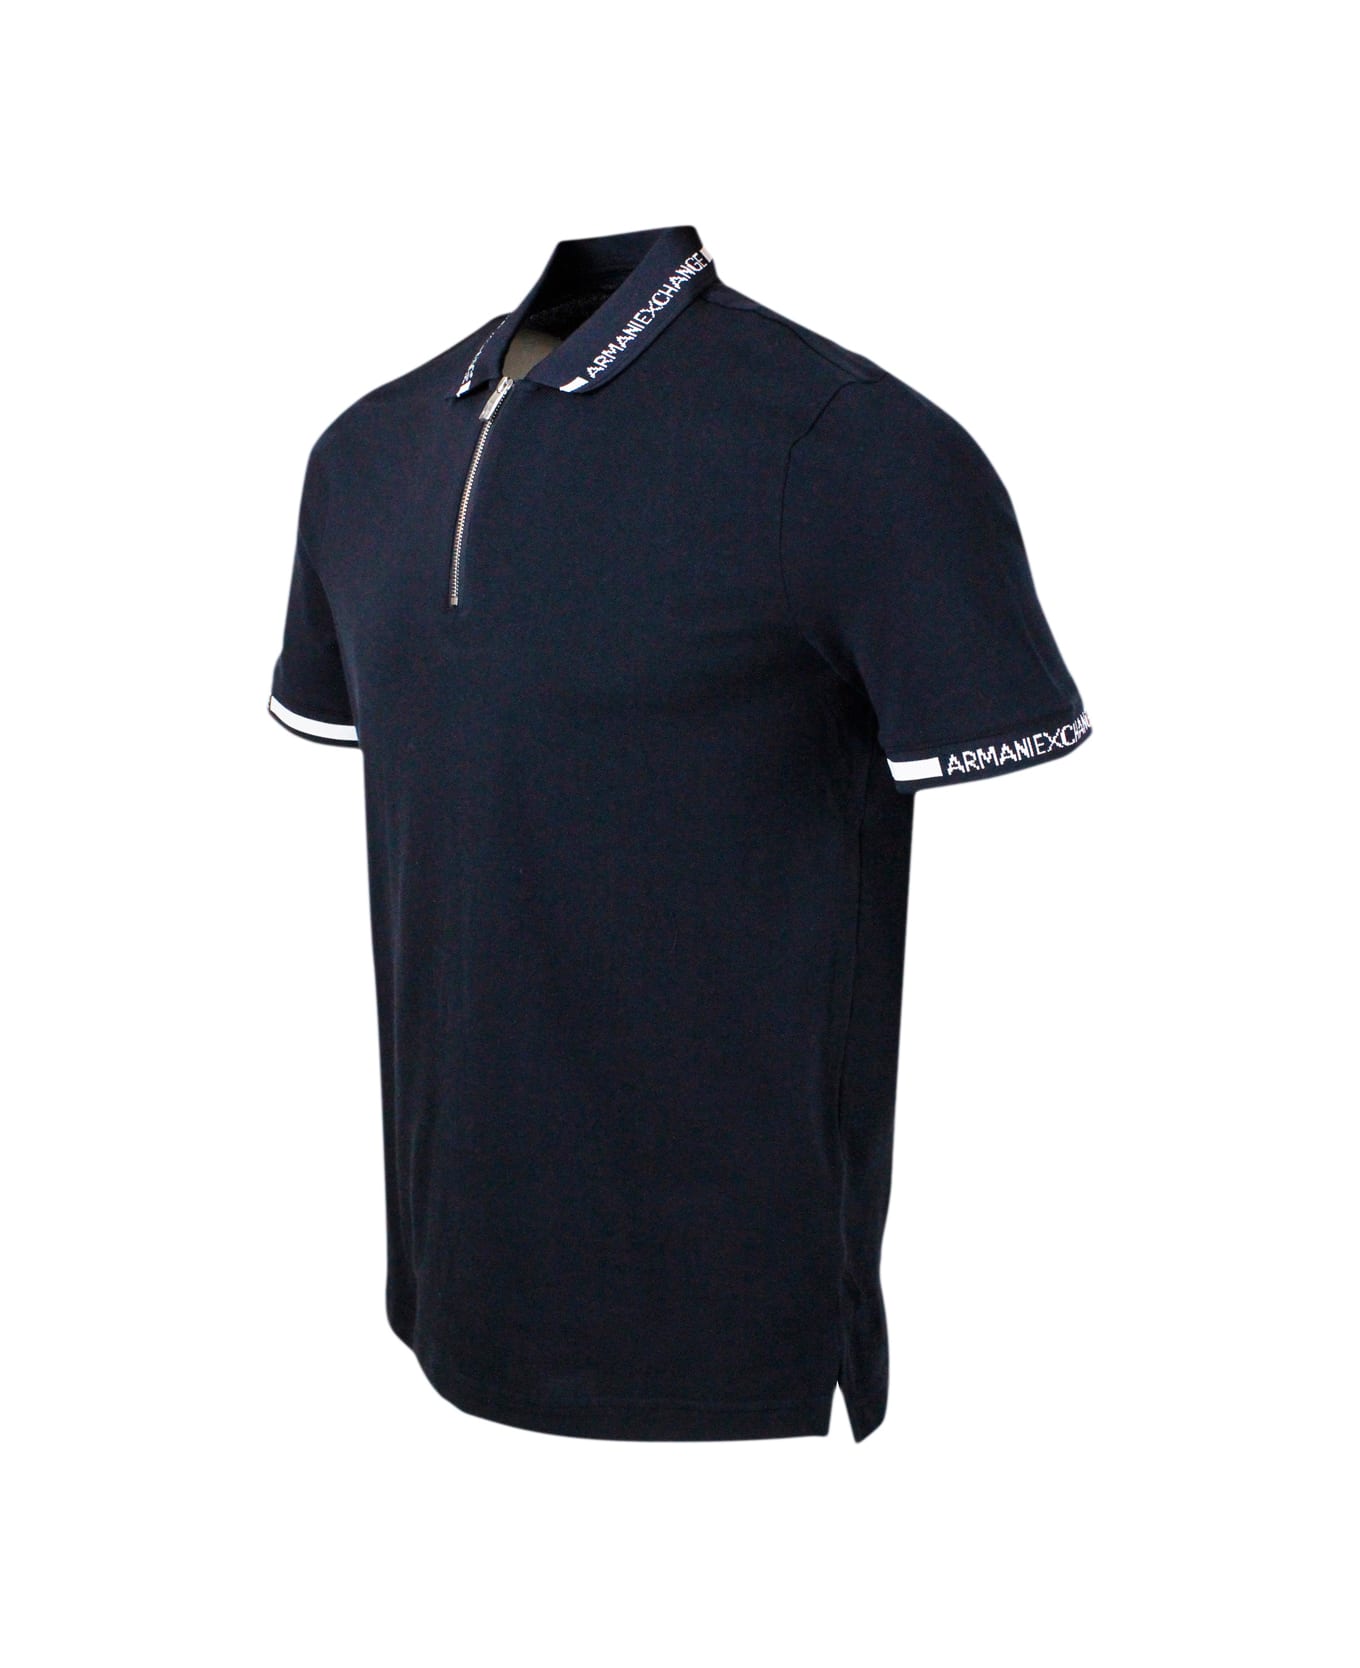 Armani Collezioni Hort-sleeved Pique Cotton Polo Shirt With Zip Closure And Writing On The Collar - Blu